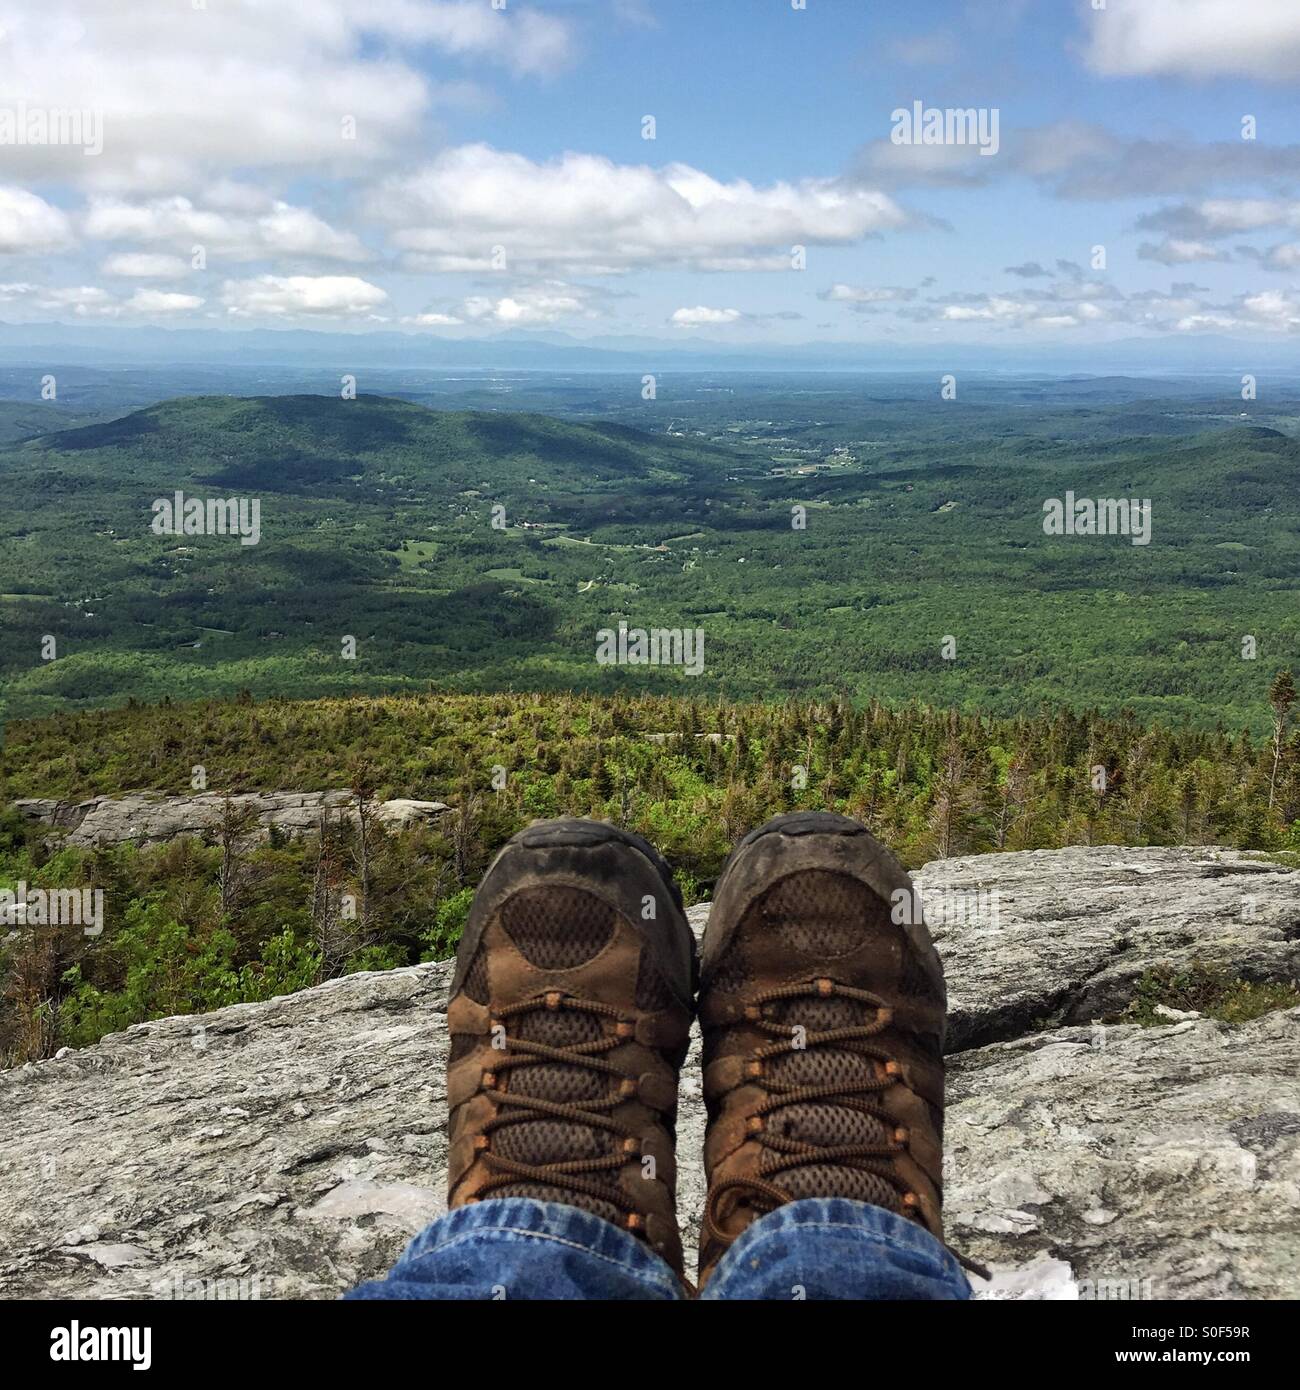 Feet in Hiking boots on a stone overlook looking towards the Champlain Valley and Lake Champlain from Mount Mansfield in Underhill, Vermont Stock Photo